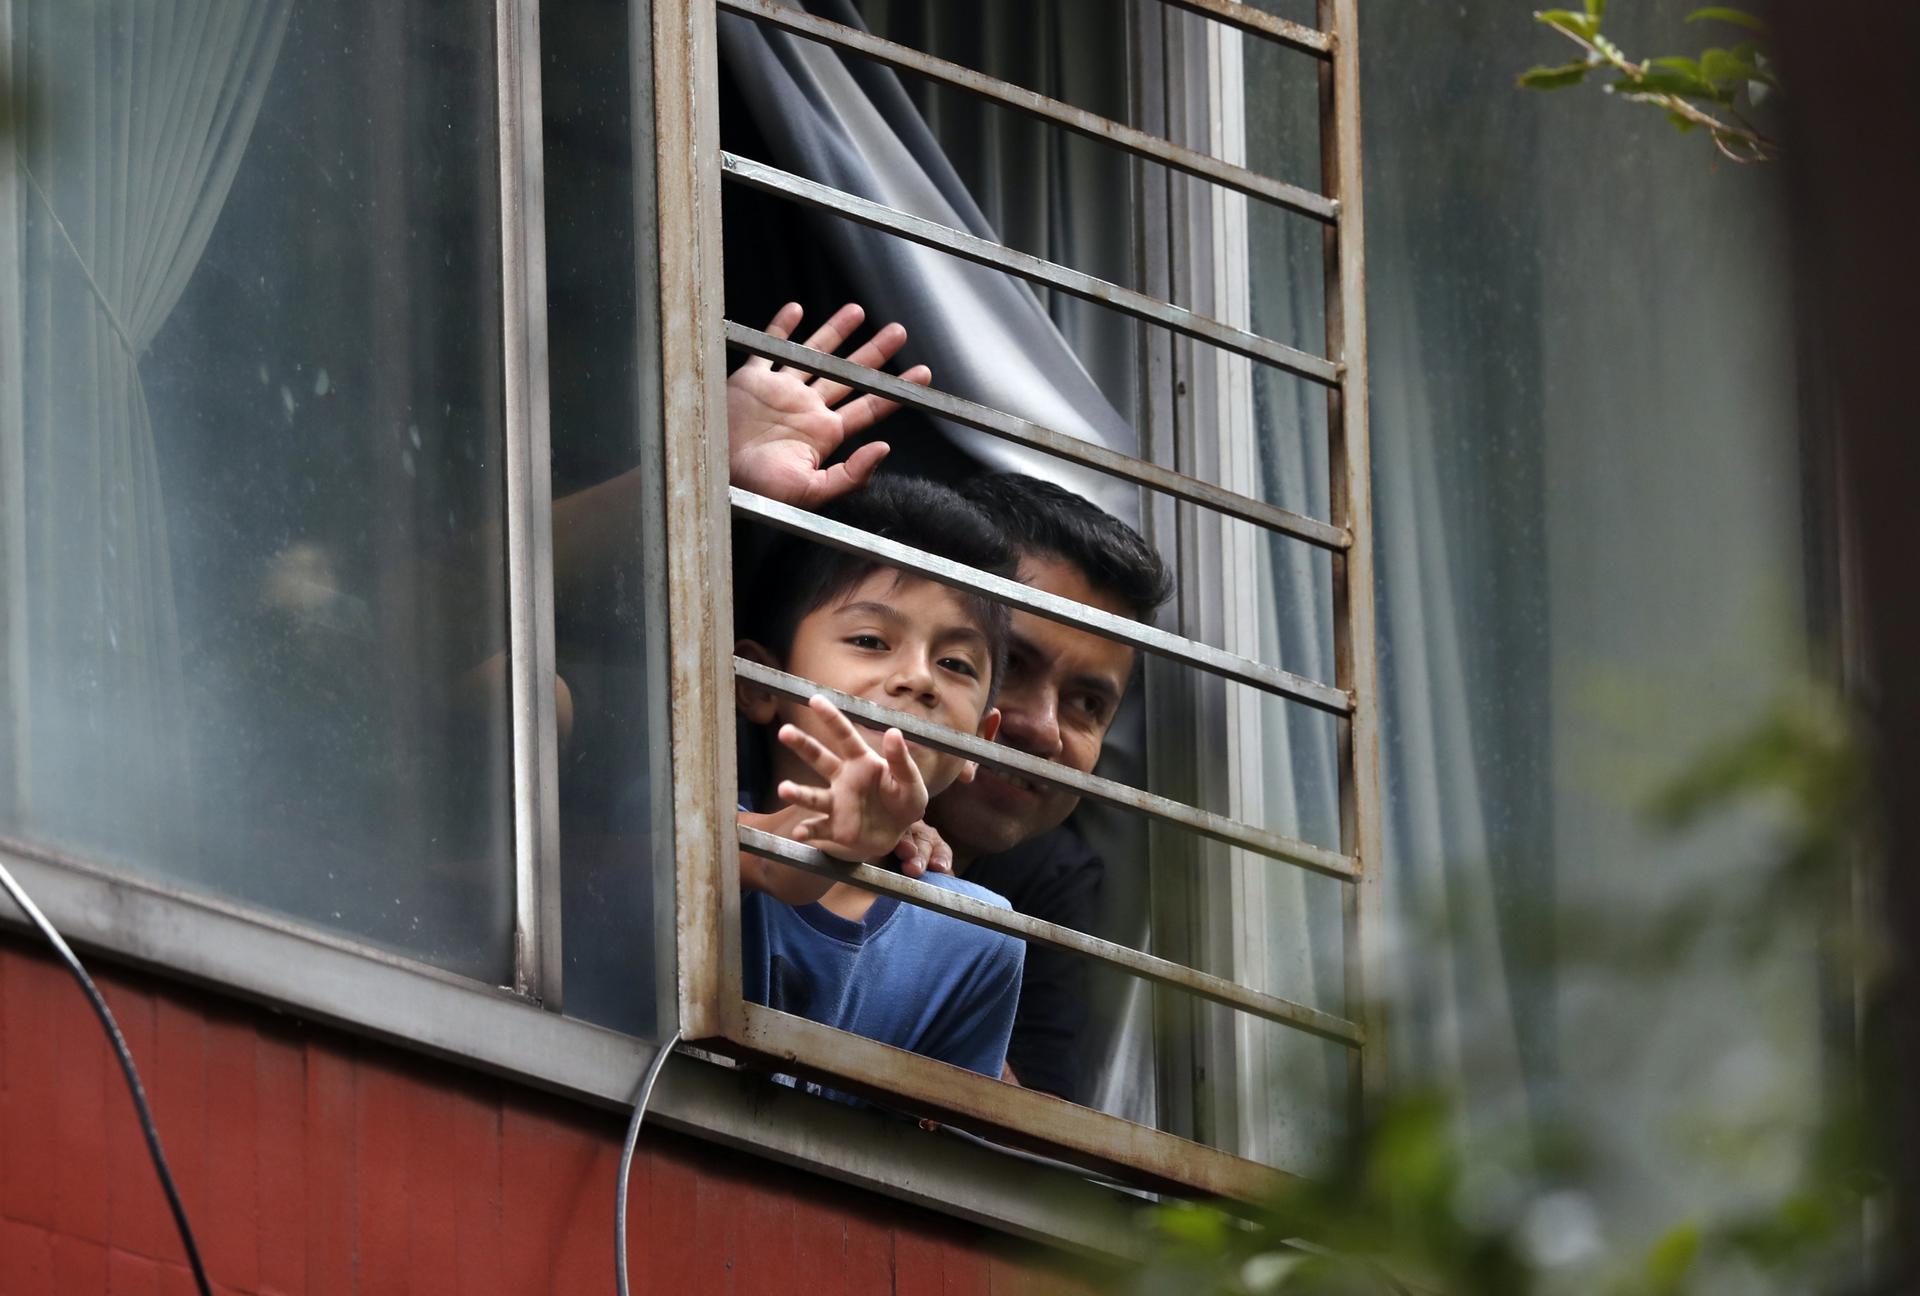 Residents wave from an apartment as Percibald García reads children's books aloud outside the high-rise buildings in the Tlatelolco housing complex, in Mexico City, Mexico, on July 18, 2020.